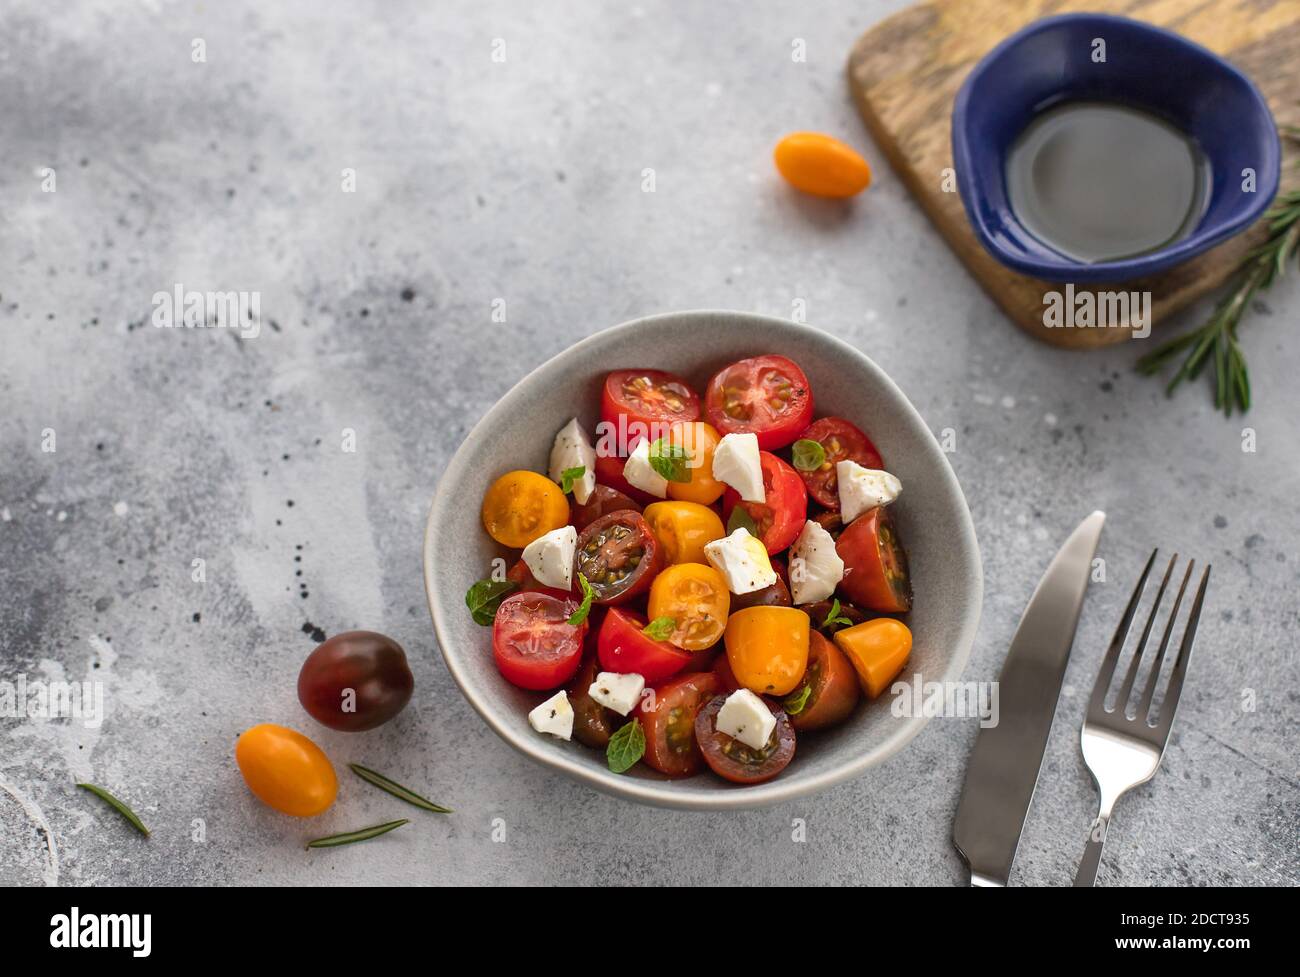 Dietary salad with fresh cherry tomatoes, feta cheese, rosemary and olive oil. vegiterian healthy concept. gray concrete background, horizontal image Stock Photo